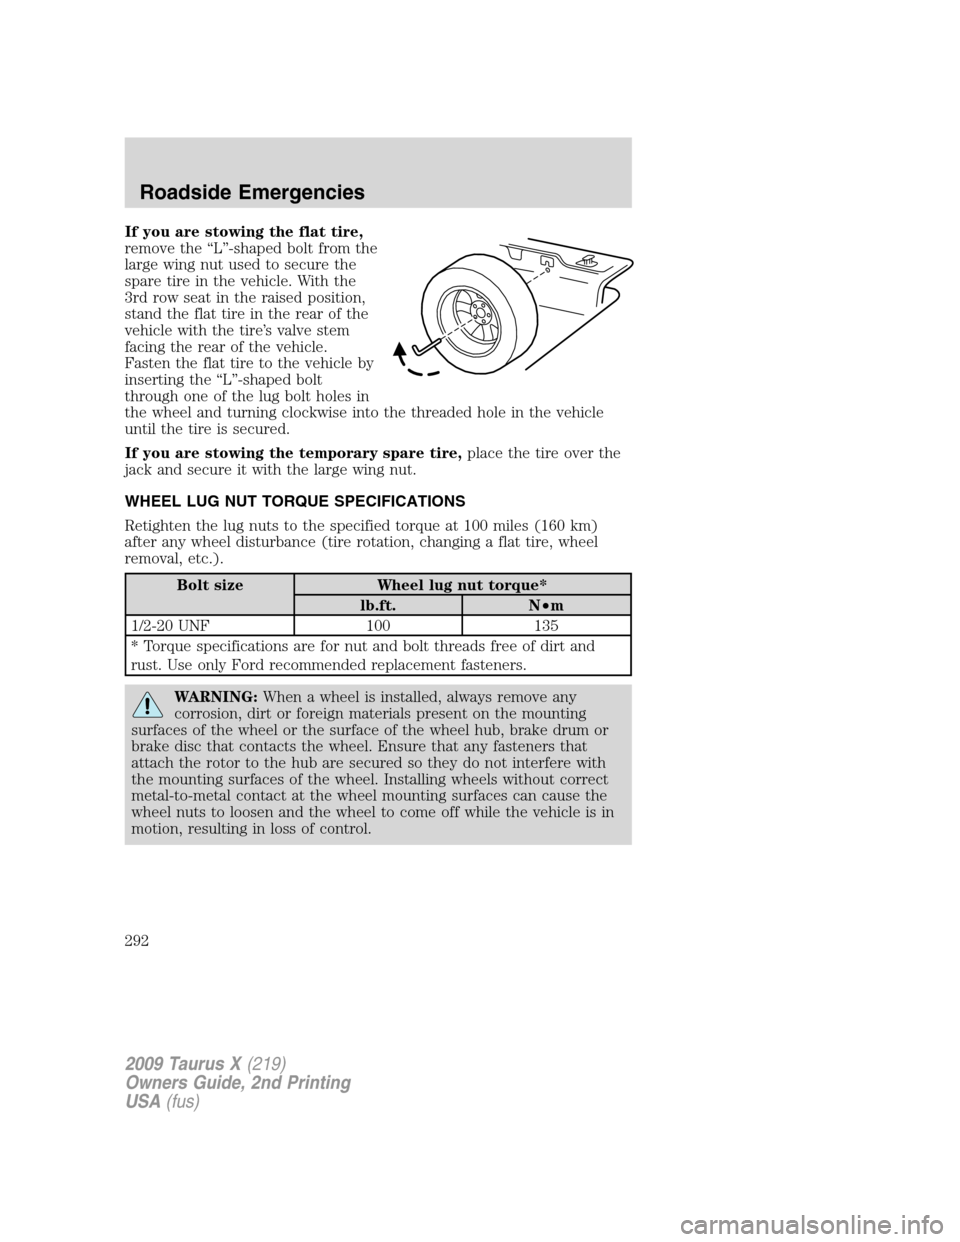 FORD TAURUS X 2009 1.G Owners Manual If you are stowing the flat tire,
remove the “L”-shaped bolt from the
large wing nut used to secure the
spare tire in the vehicle. With the
3rd row seat in the raised position,
stand the flat tire